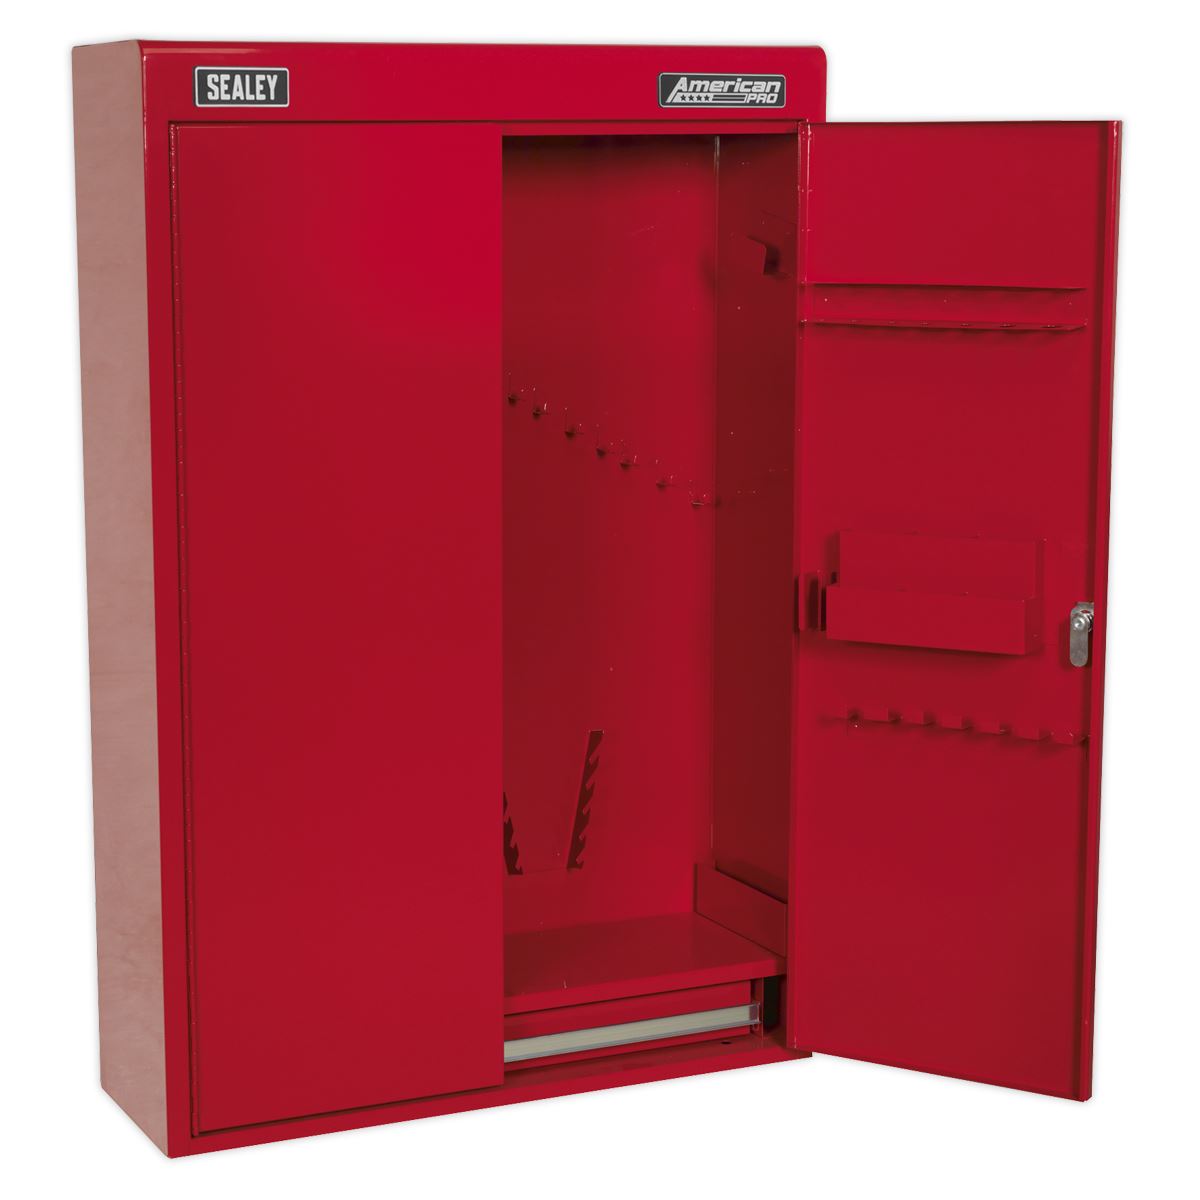 Sealey American Pro Wall Mounting Tool Cabinet with 1 Drawer